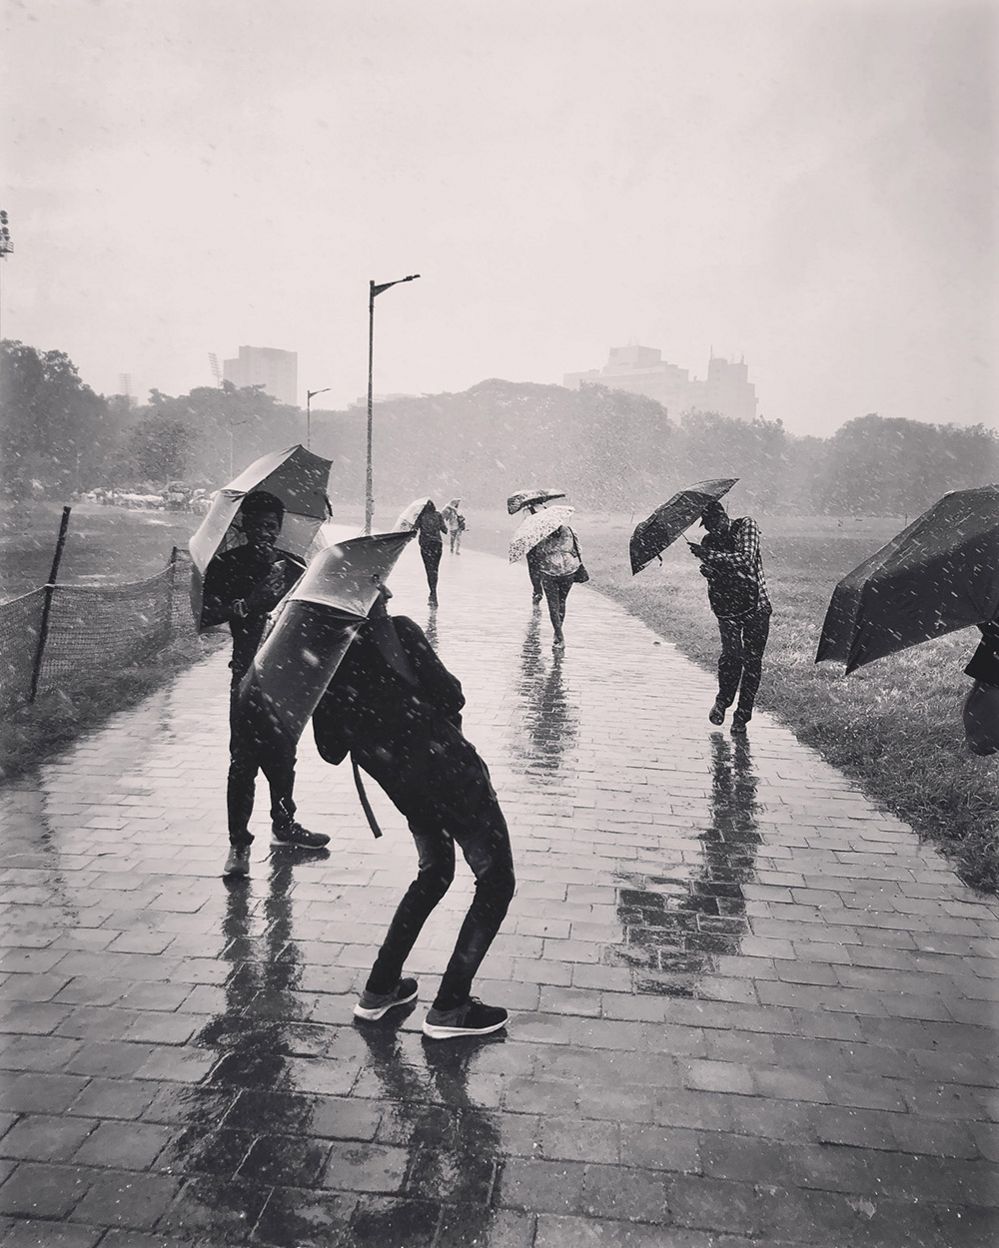 People shelter from the rain under umbrellas